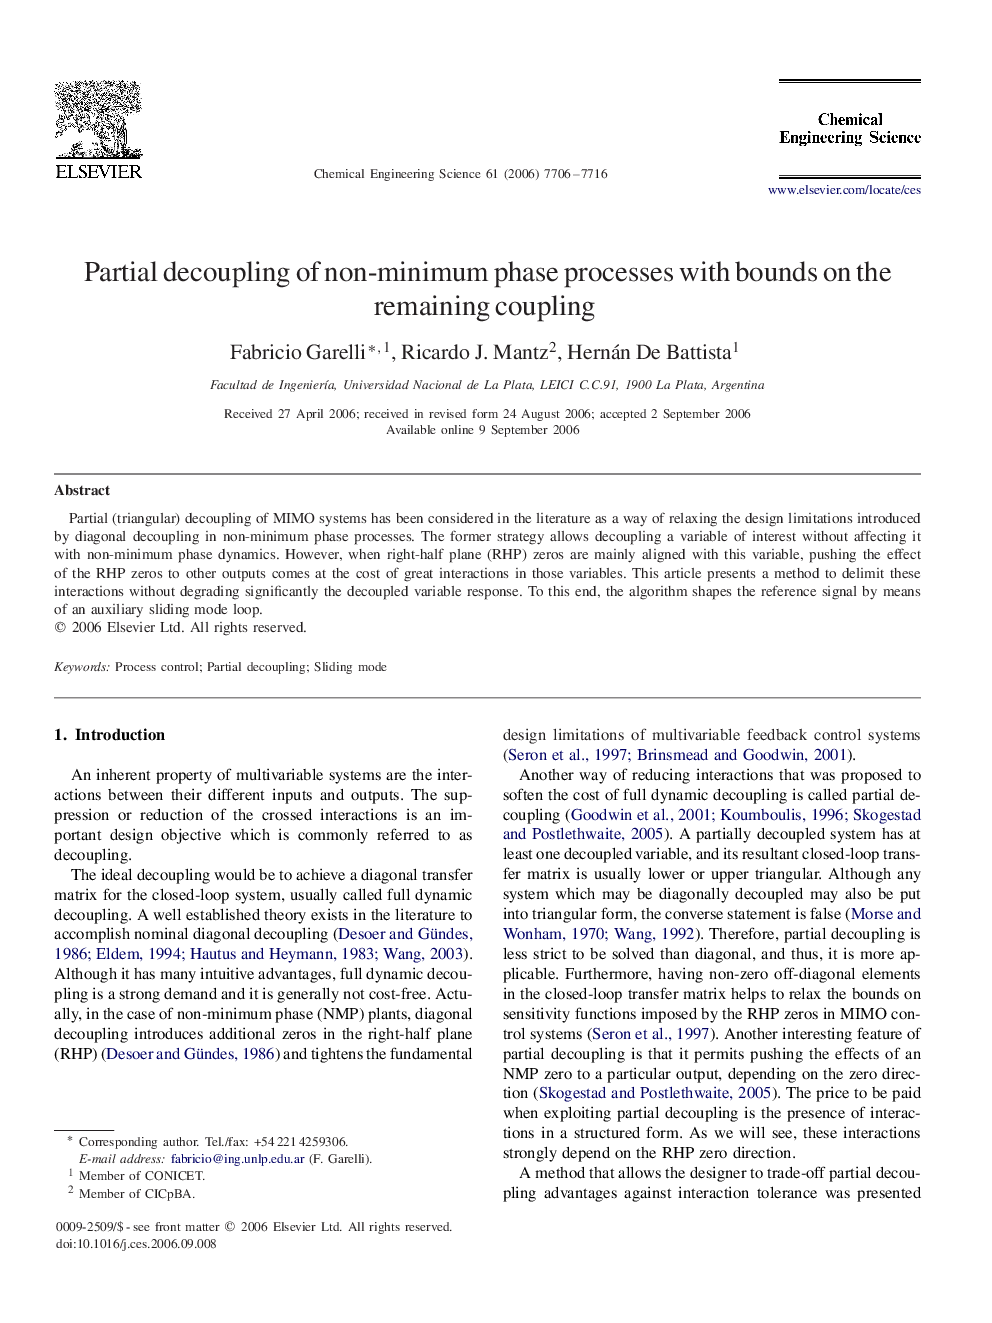 Partial decoupling of non-minimum phase processes with bounds on the remaining coupling